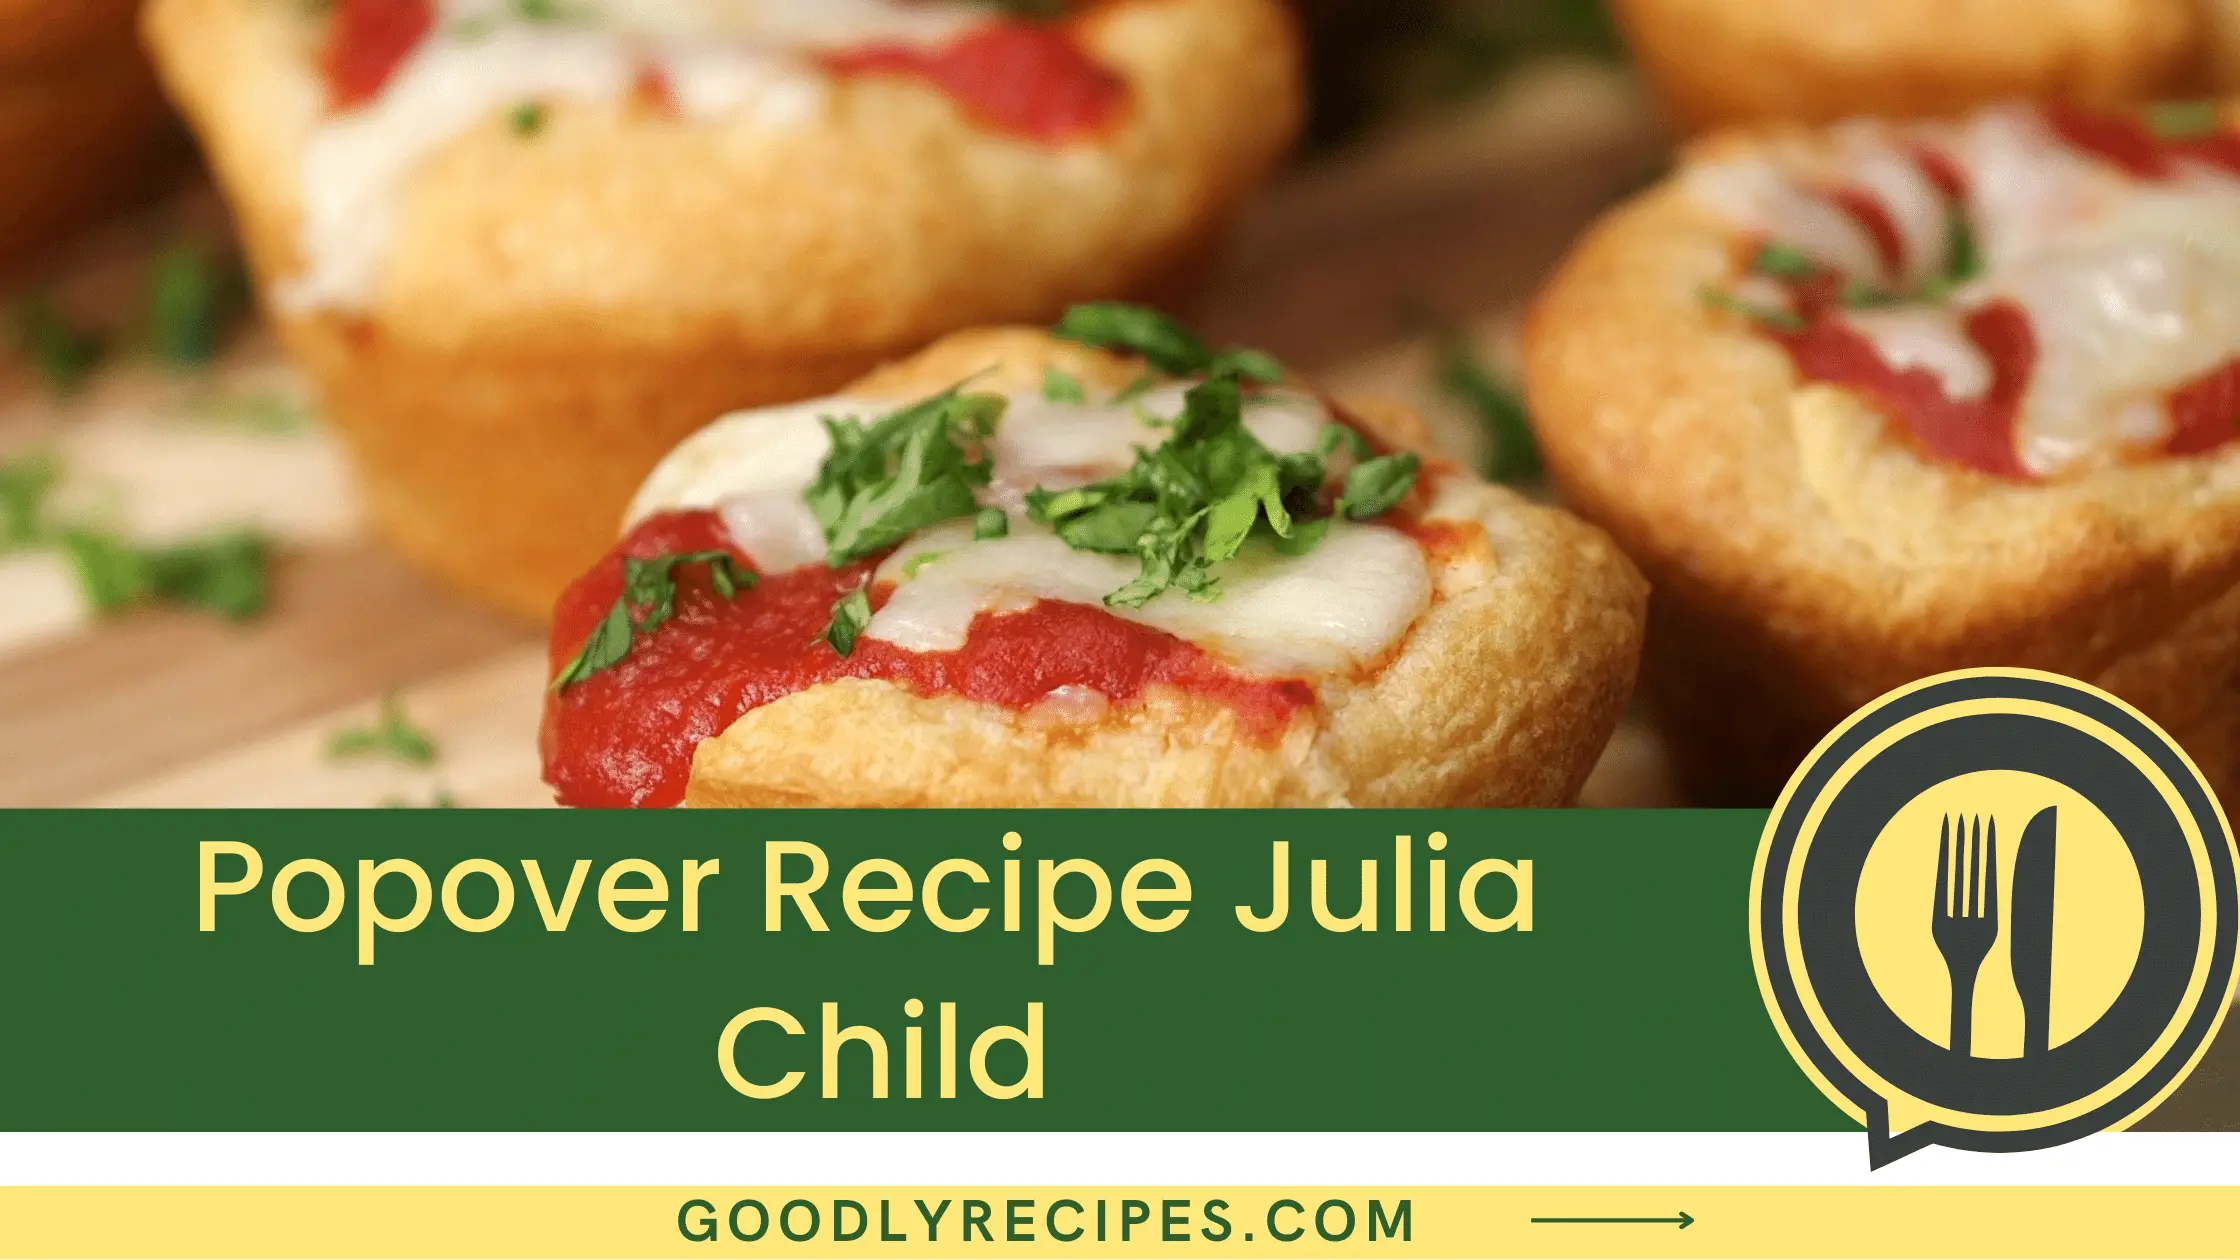 What is Julia Child's Popover?